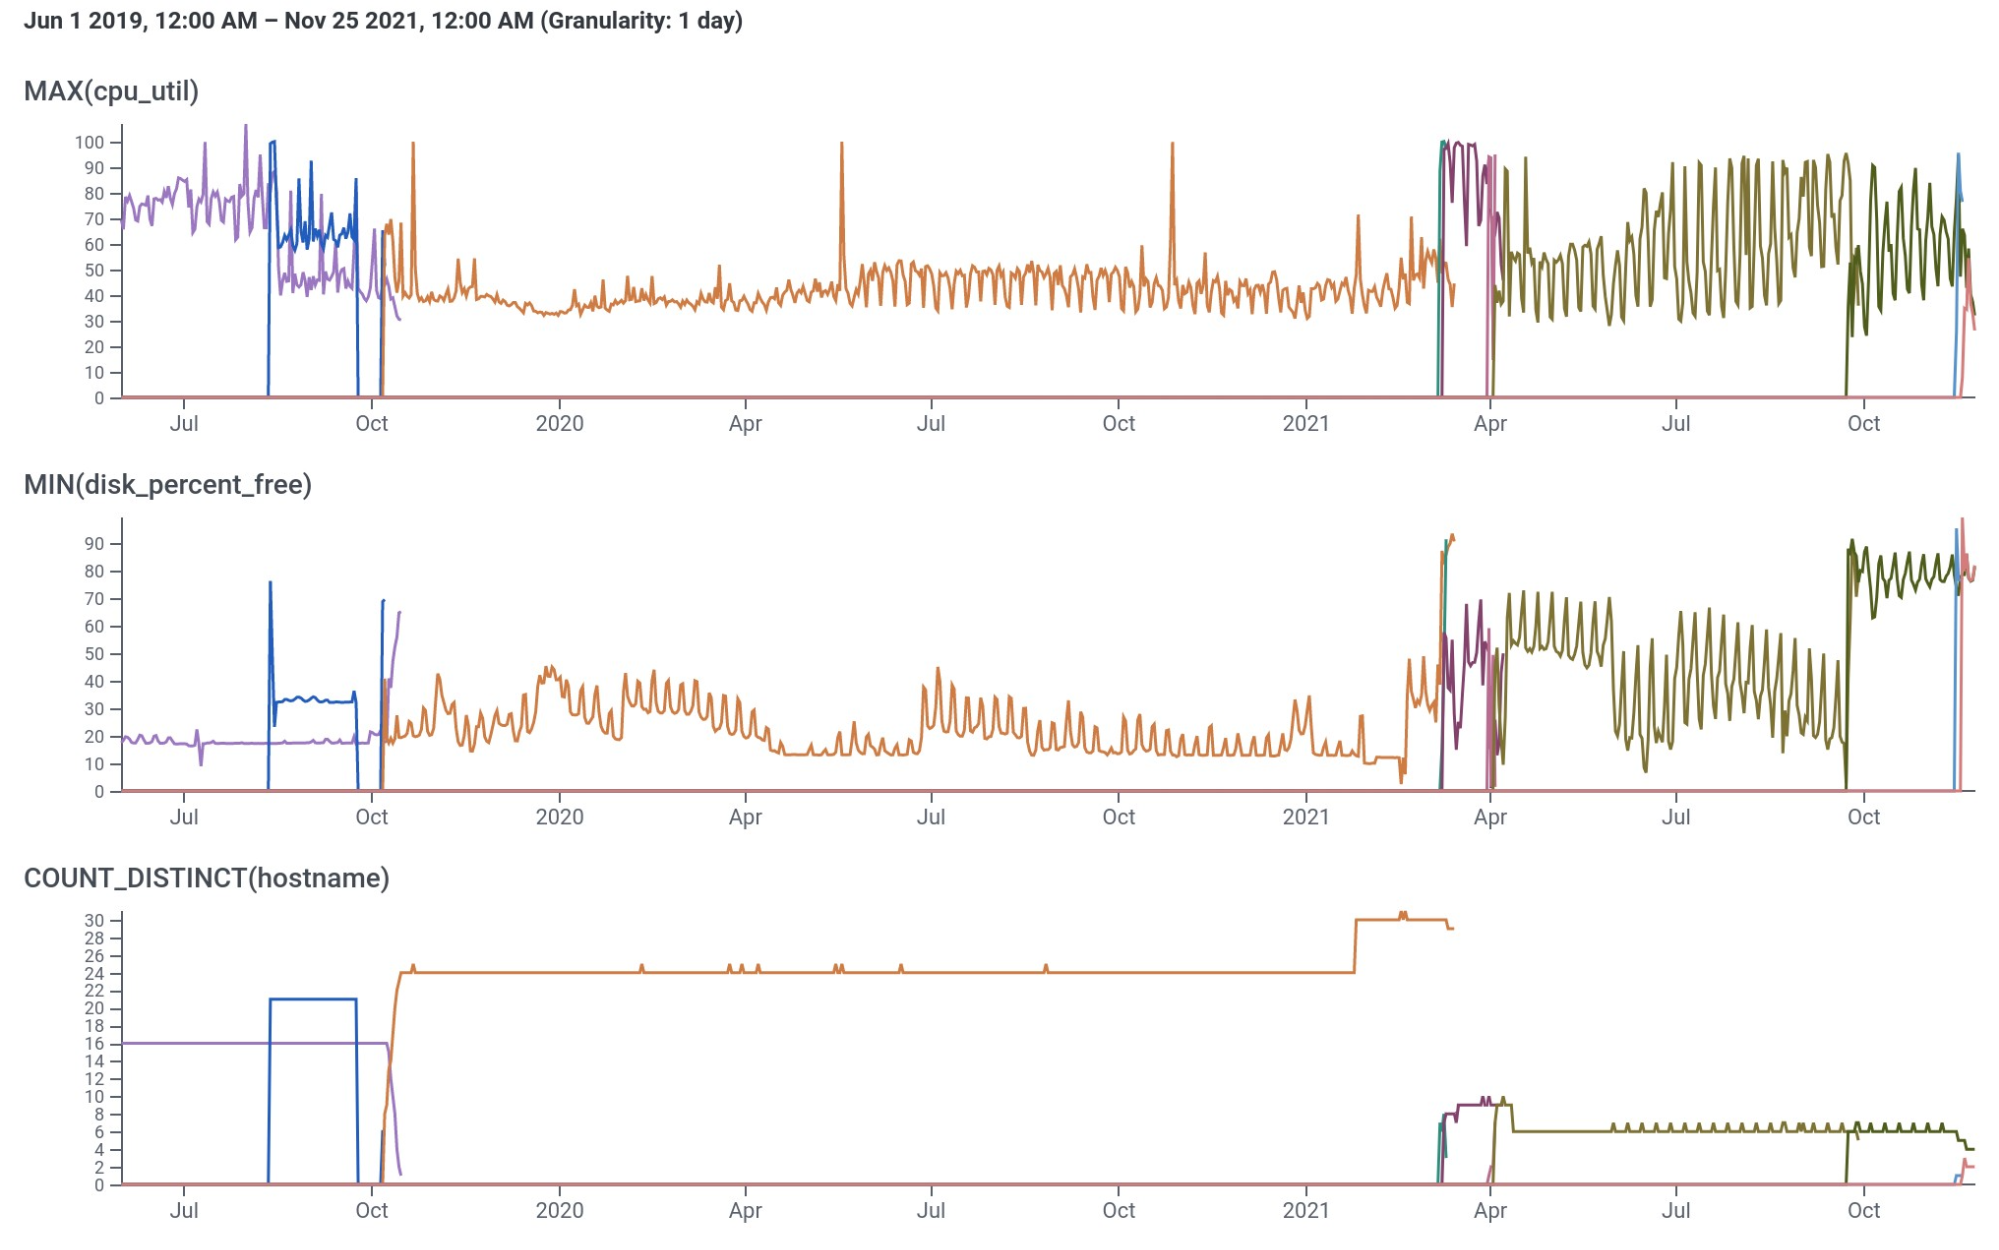 Figure 1: A historical view of the number and kind of instances powering our Kafka cluster over time. From left to right in order of first appearance, purple is c5.xlarge with EBS, blue is i3en.large with EBS HDD, orange is i3en.xlarge, burgundy is c6gn.xlarge, olive is i3en.2xlarge, green is i3en.3xlarge, and pink is im4gn.4xlarge.